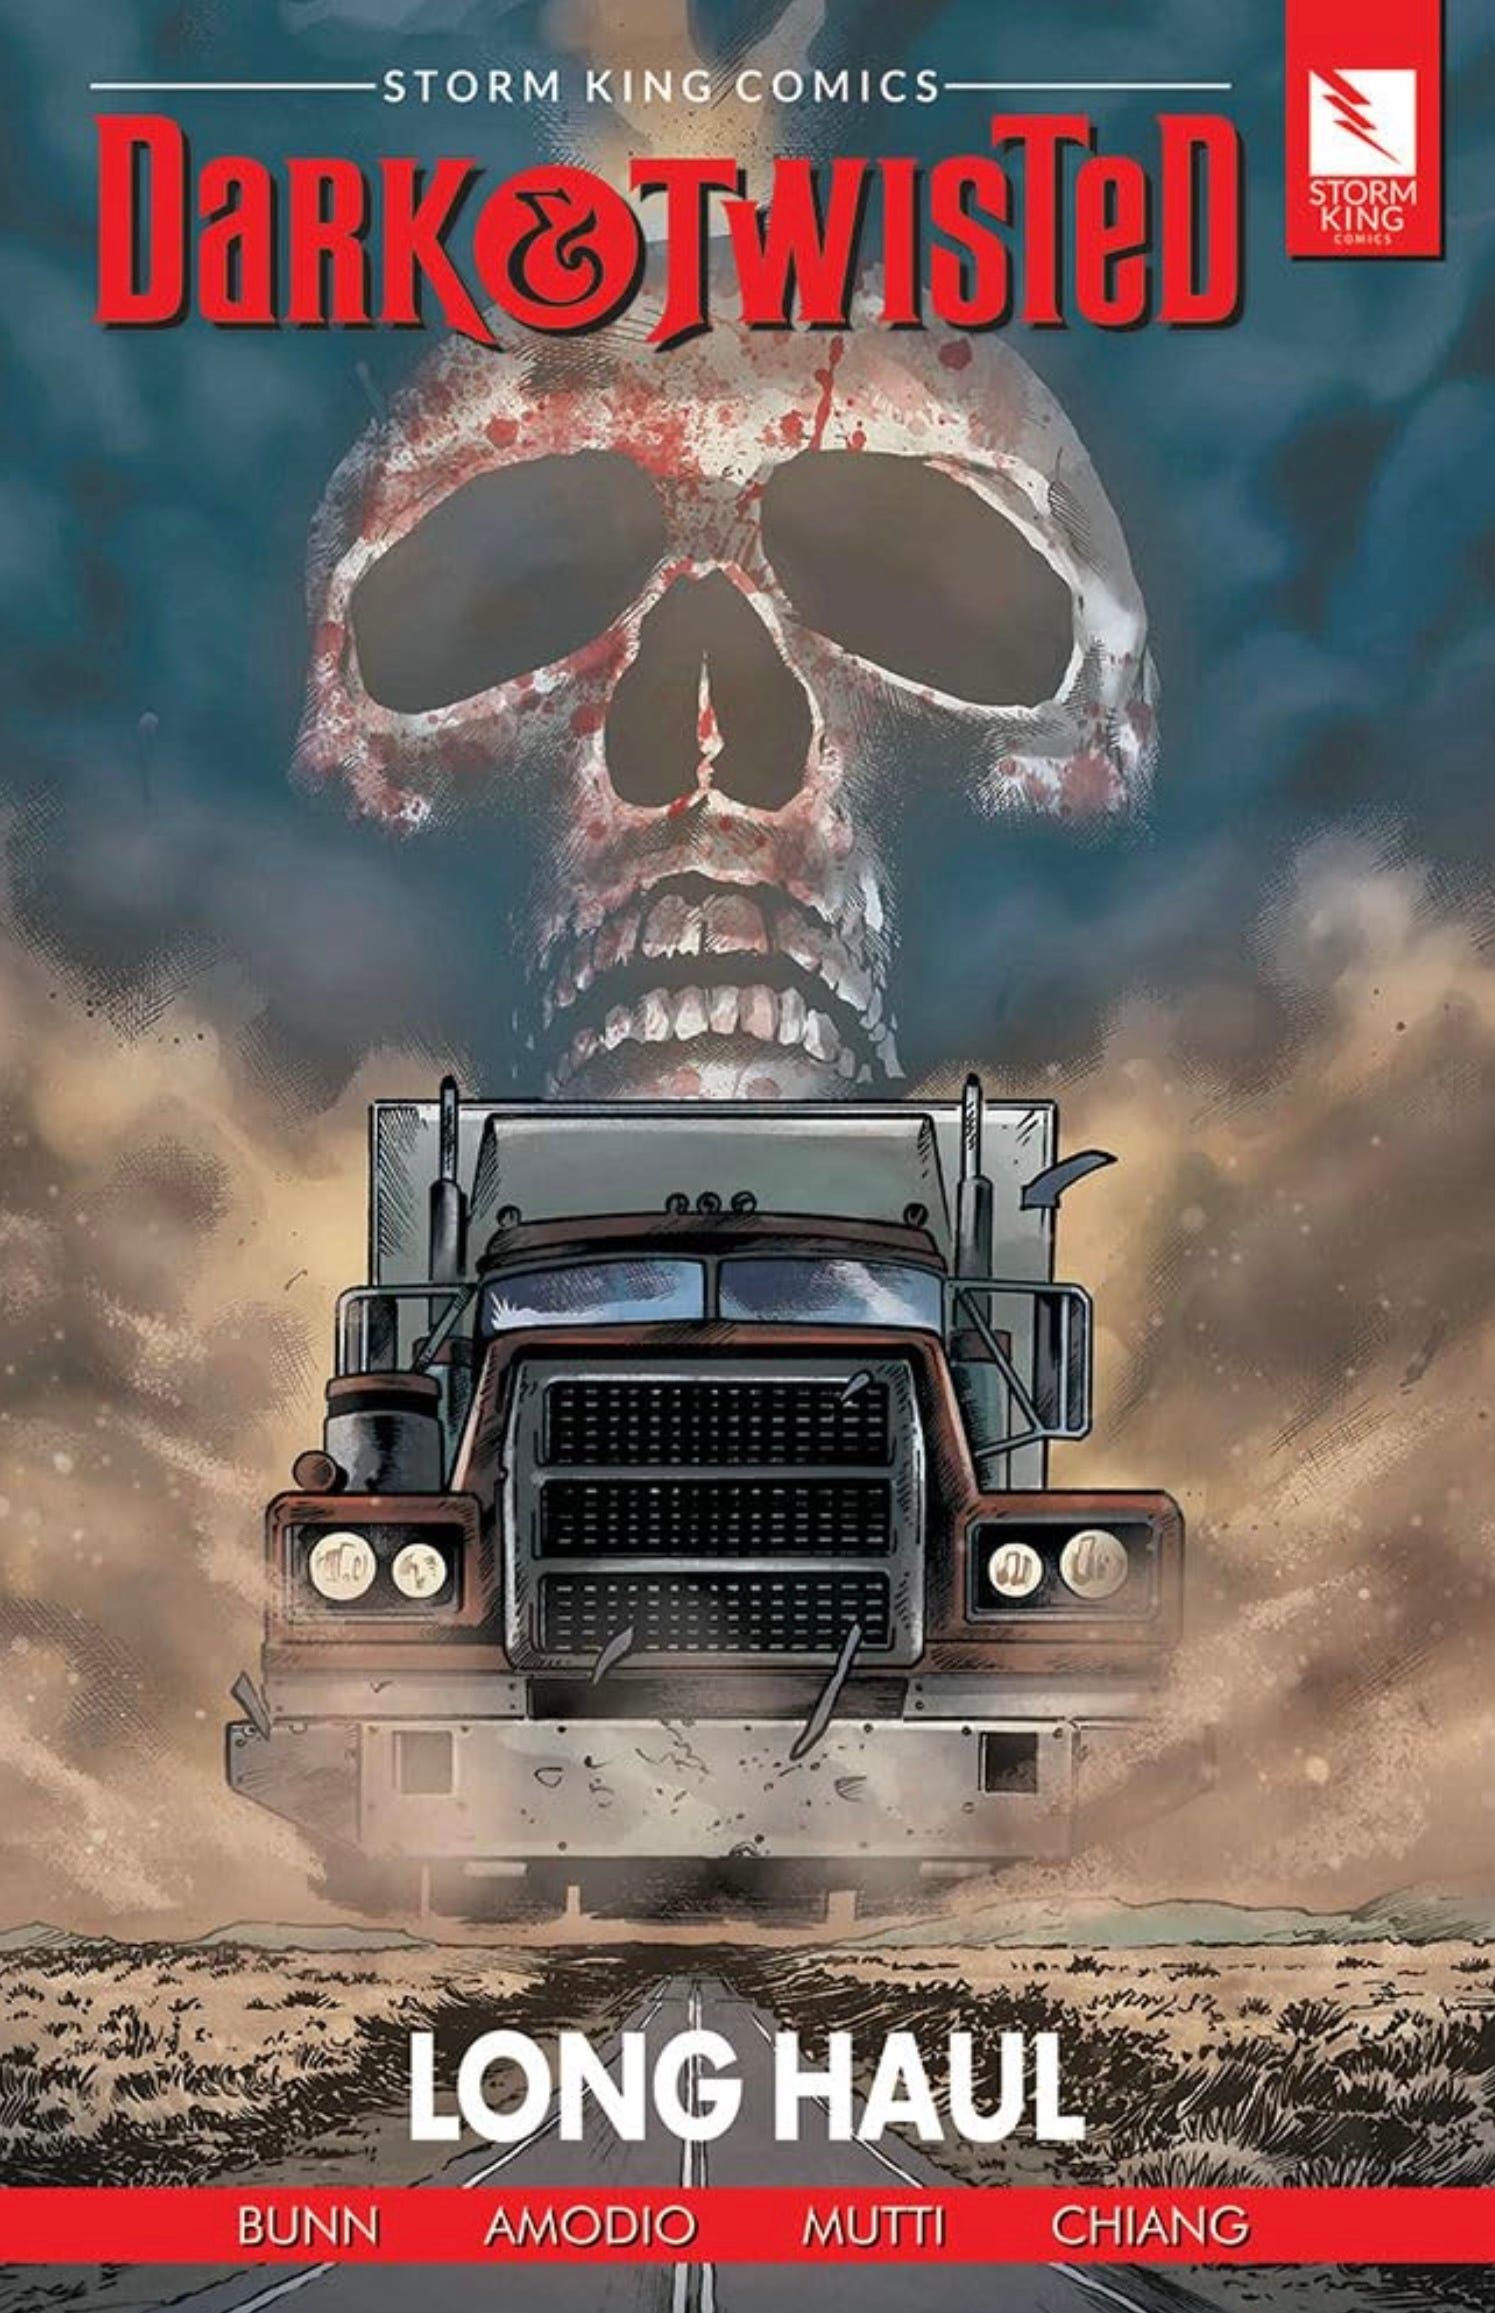 Long Haul Cover A with a truck before a skull